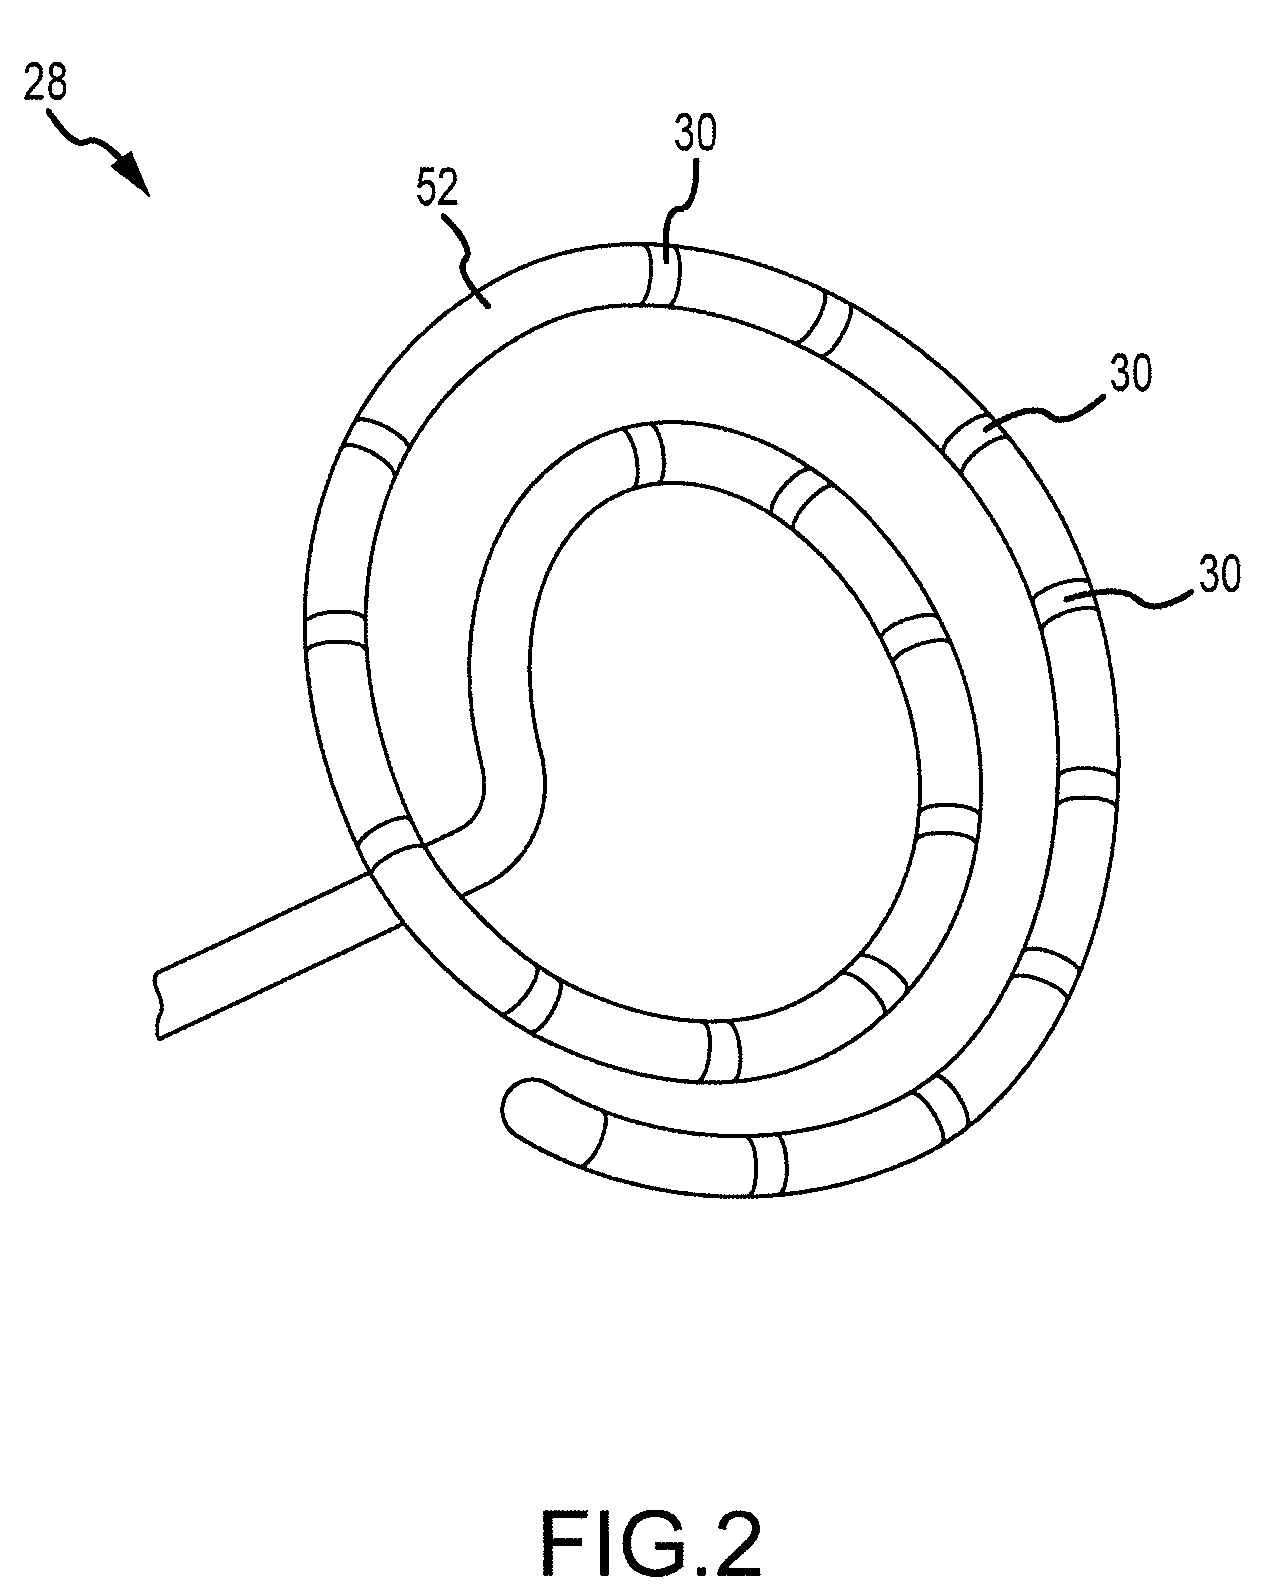 System and method for diagnosing arrhythmias and directing catheter therapies